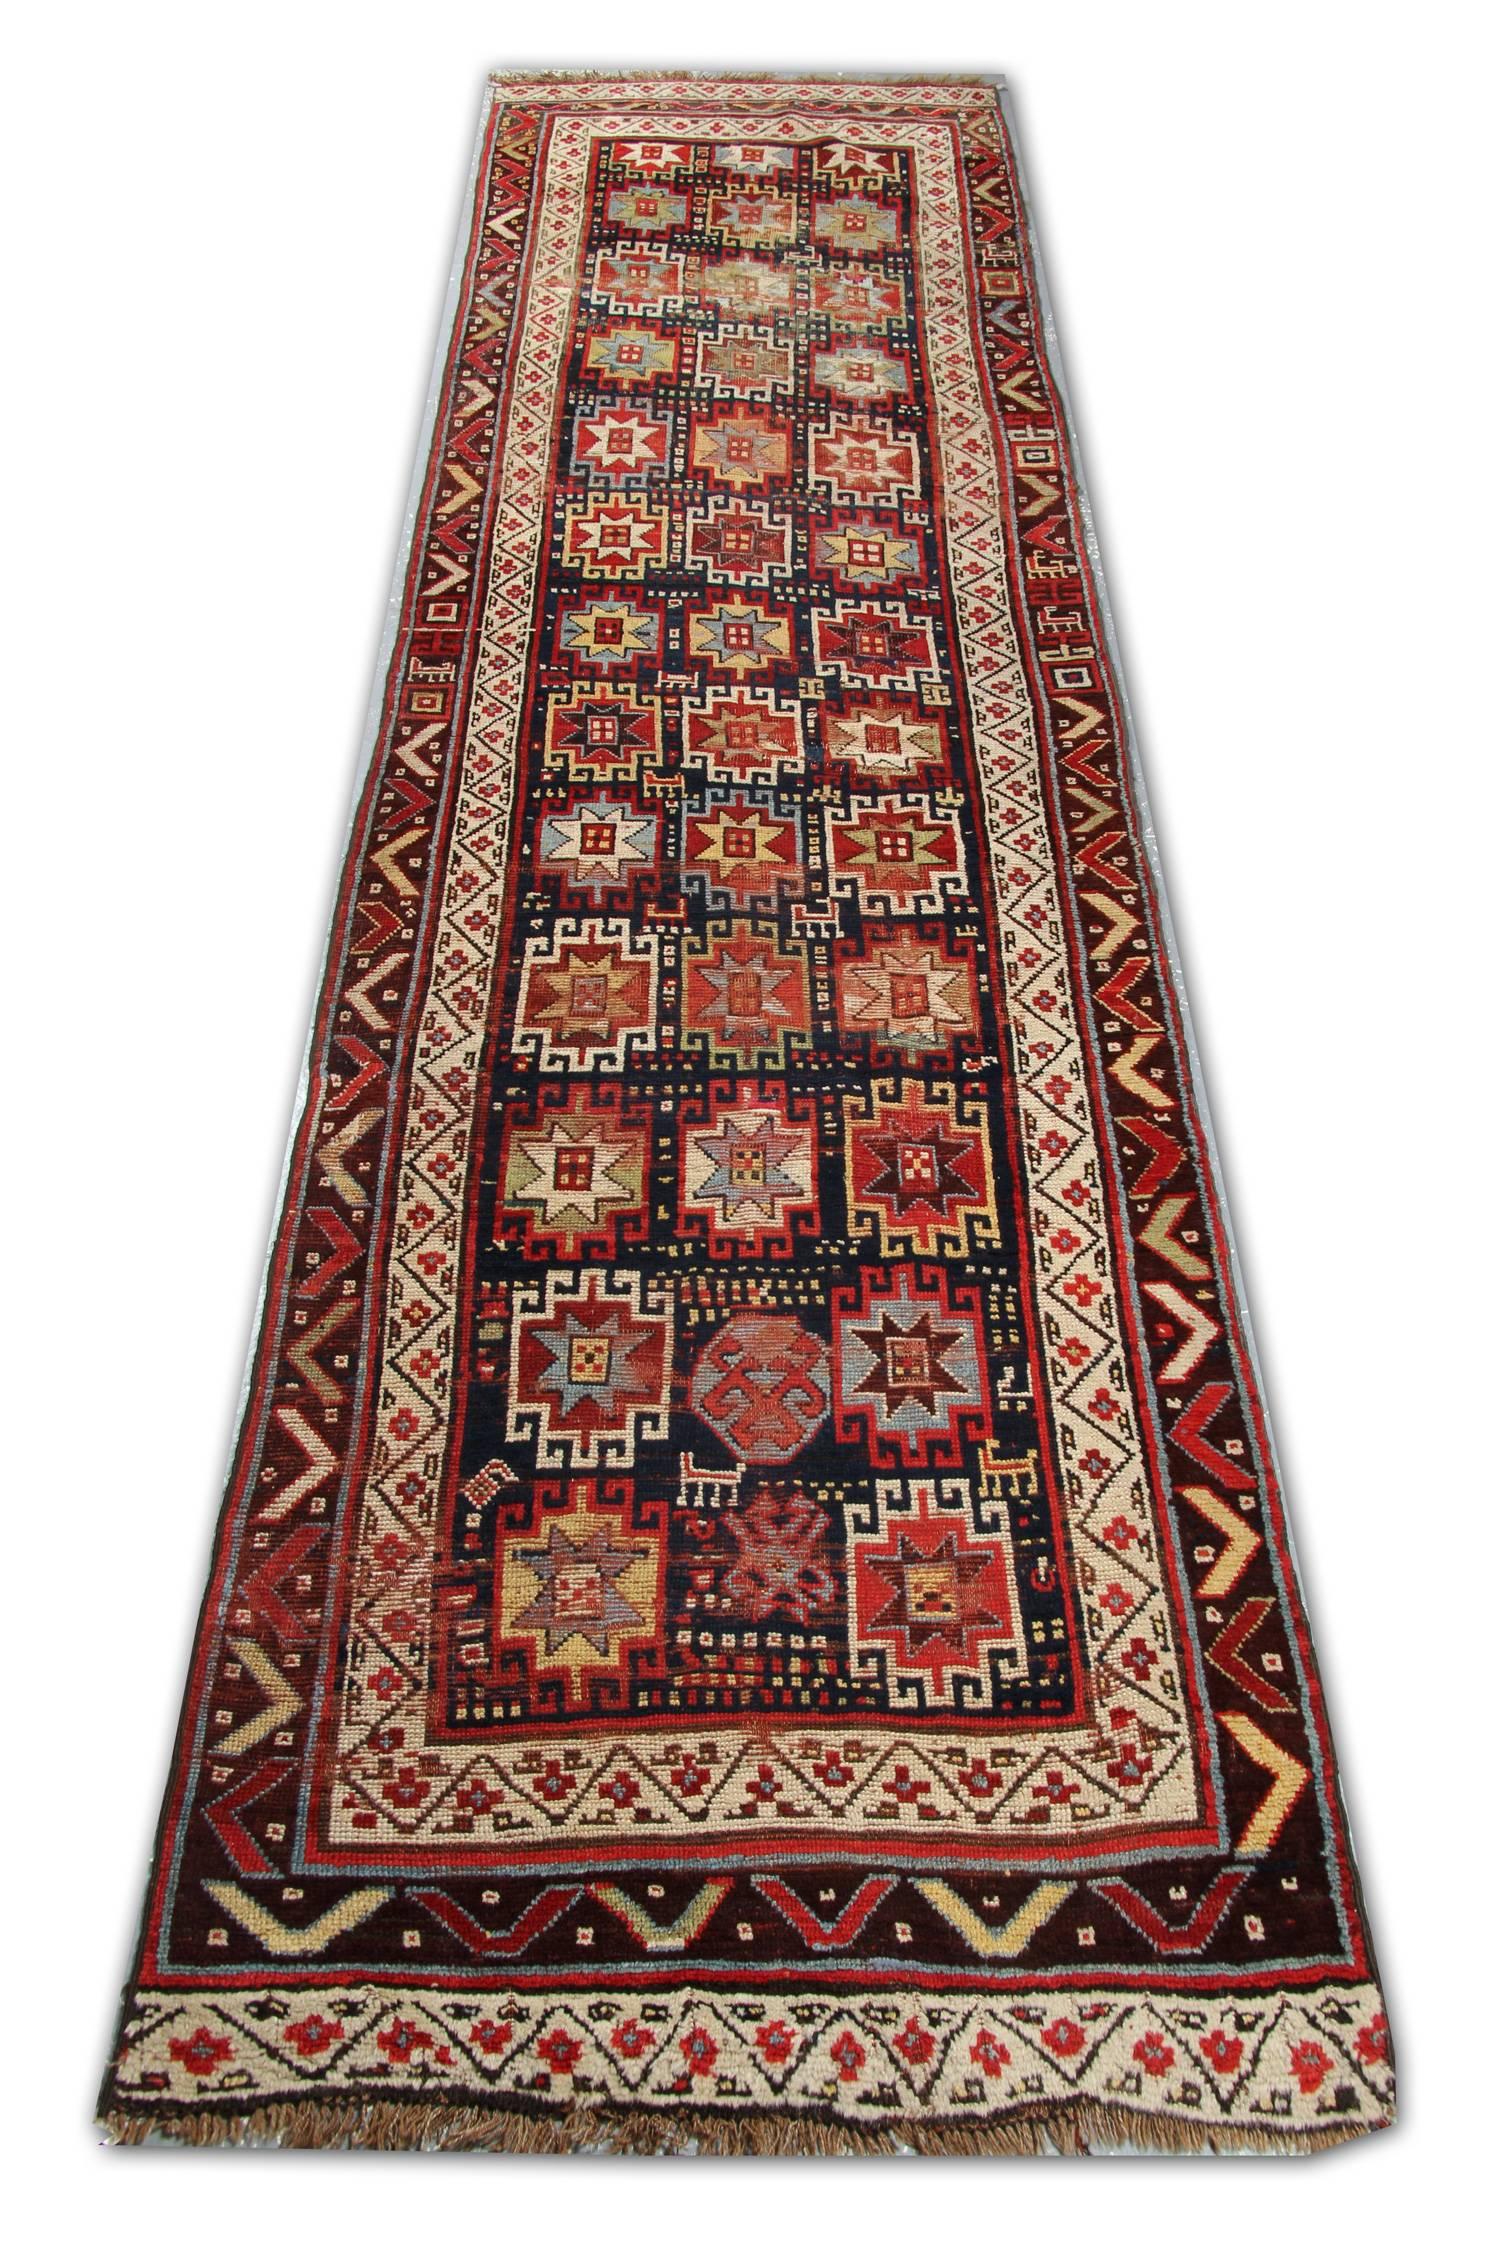 A fantastic, cheerful old tribal rug by the Kurds who inhabit the mountains on the North West of Iran. Authentic weaving traditions of wool rugs continued far longer in this remote region than in other parts of Iran. These runner rugs have excellent